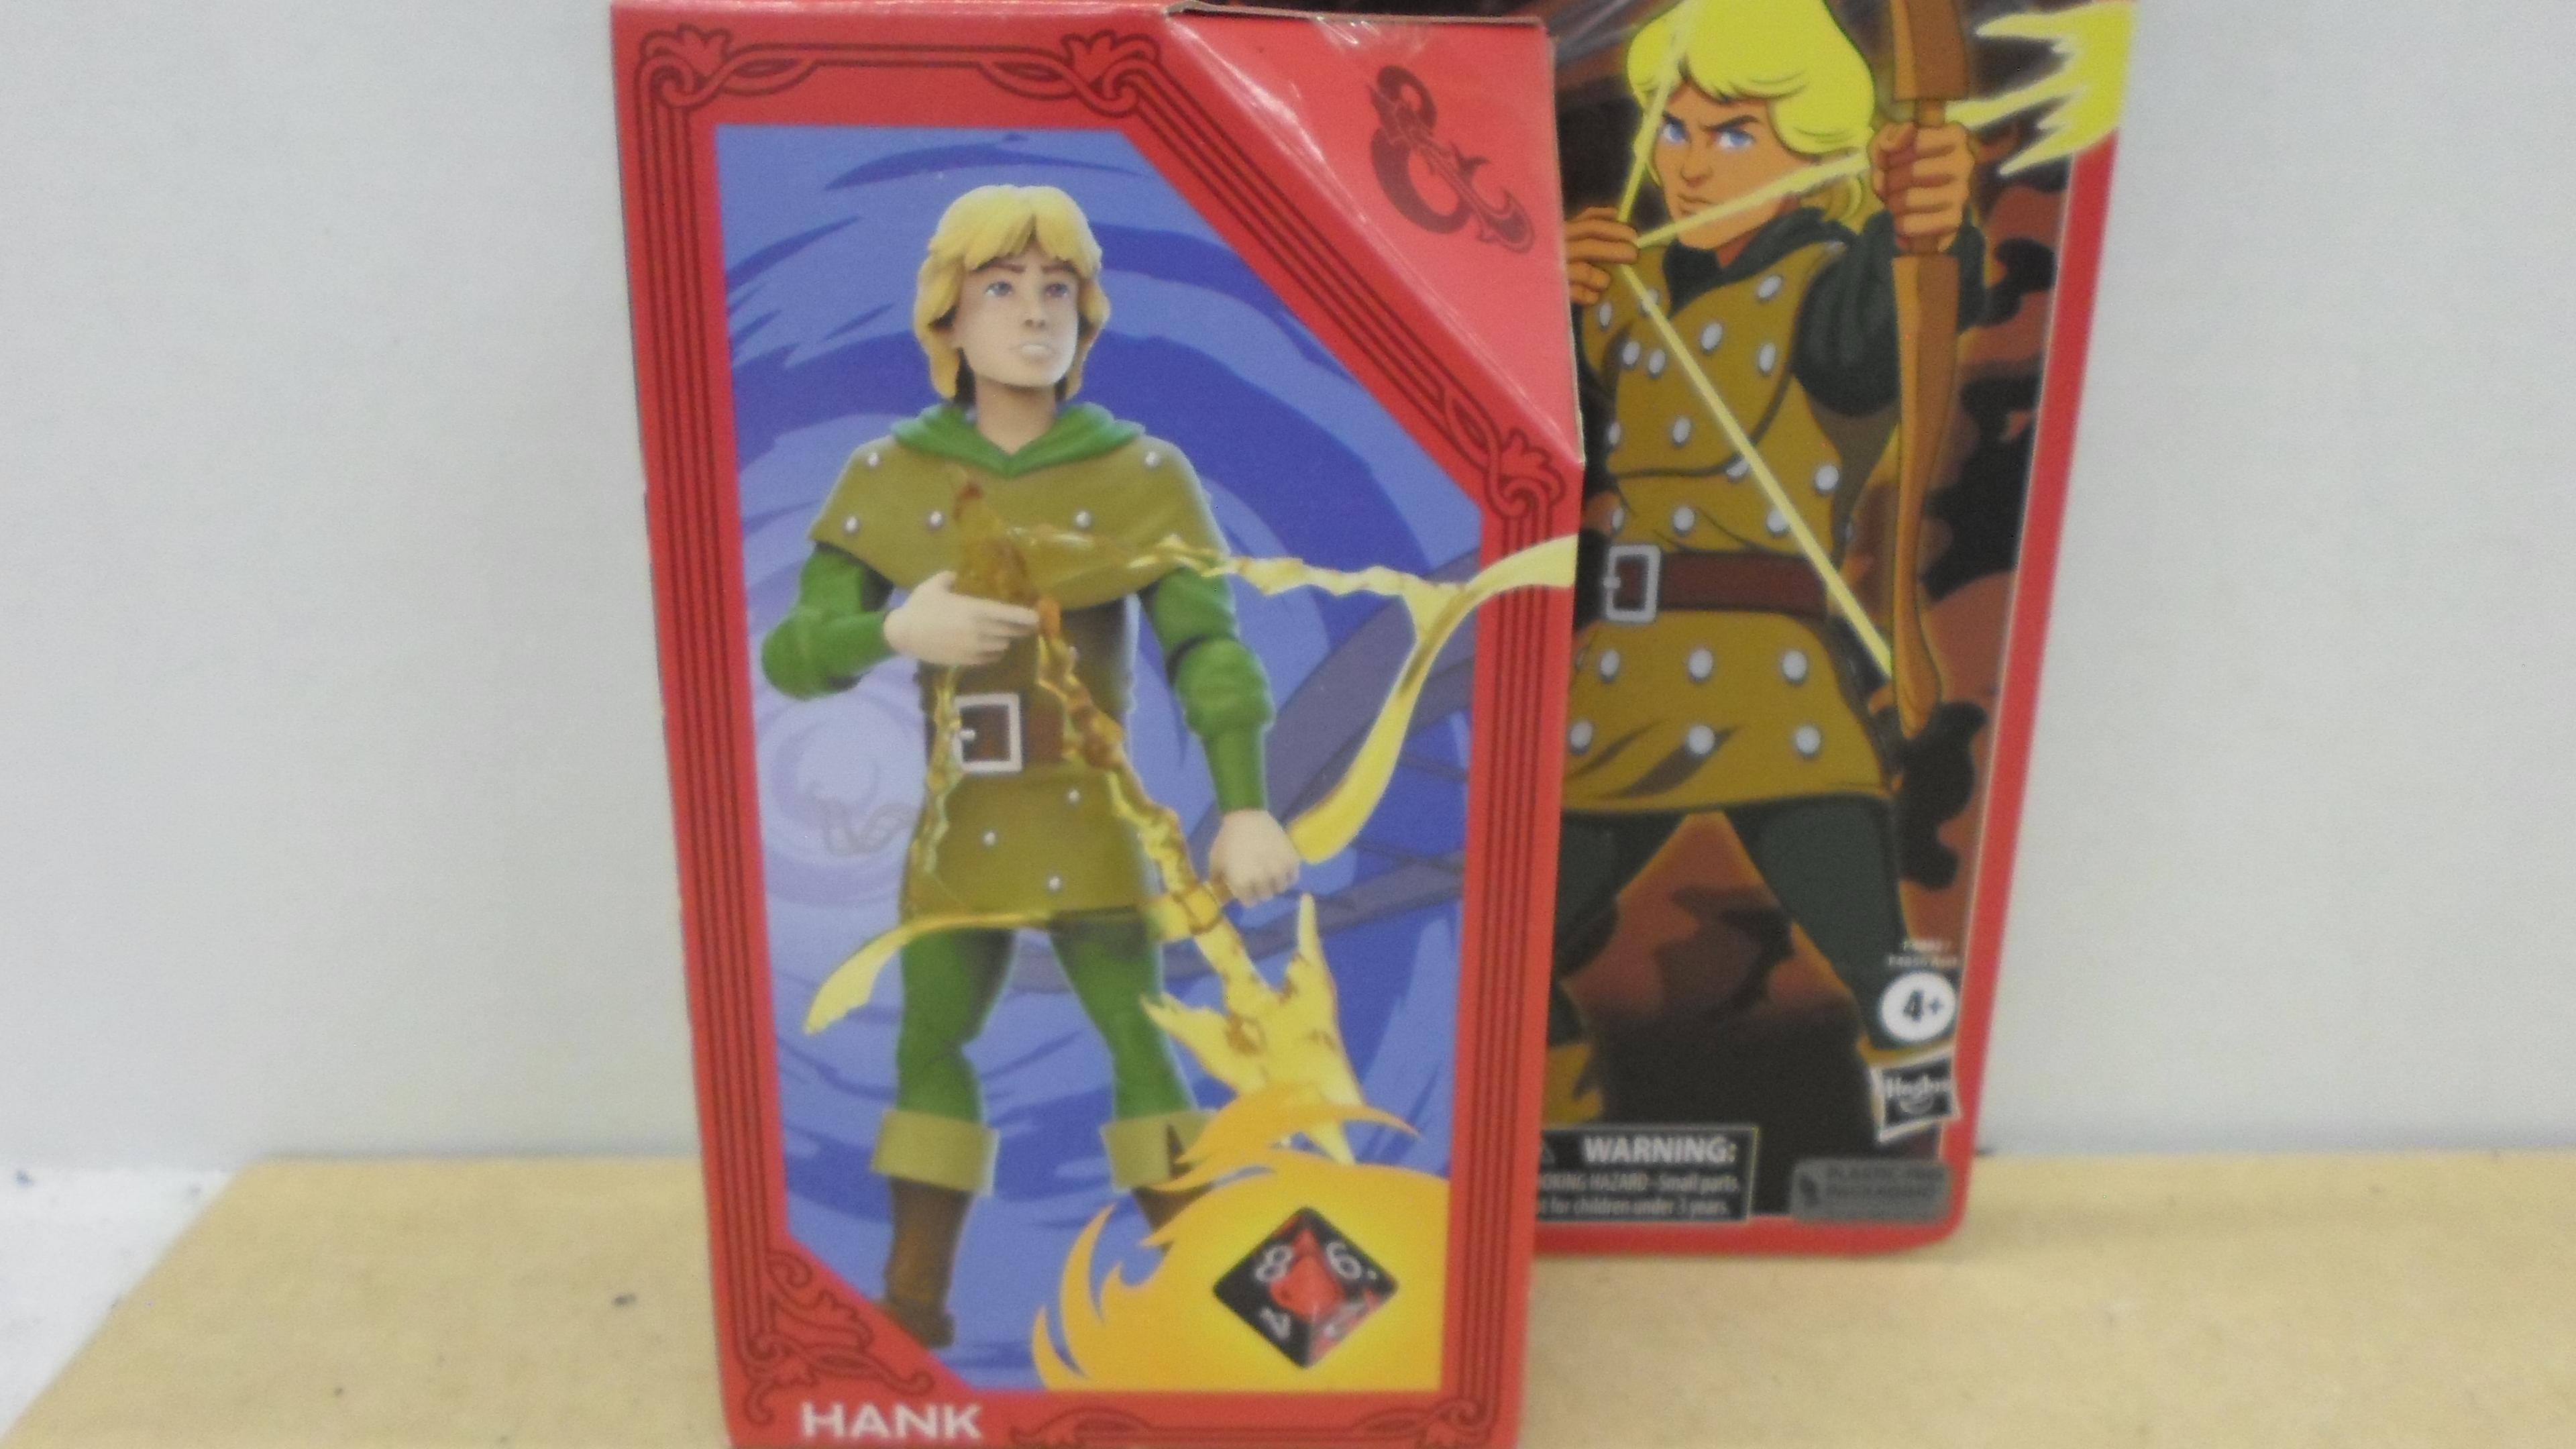 D&D toy, New in the box hank figure